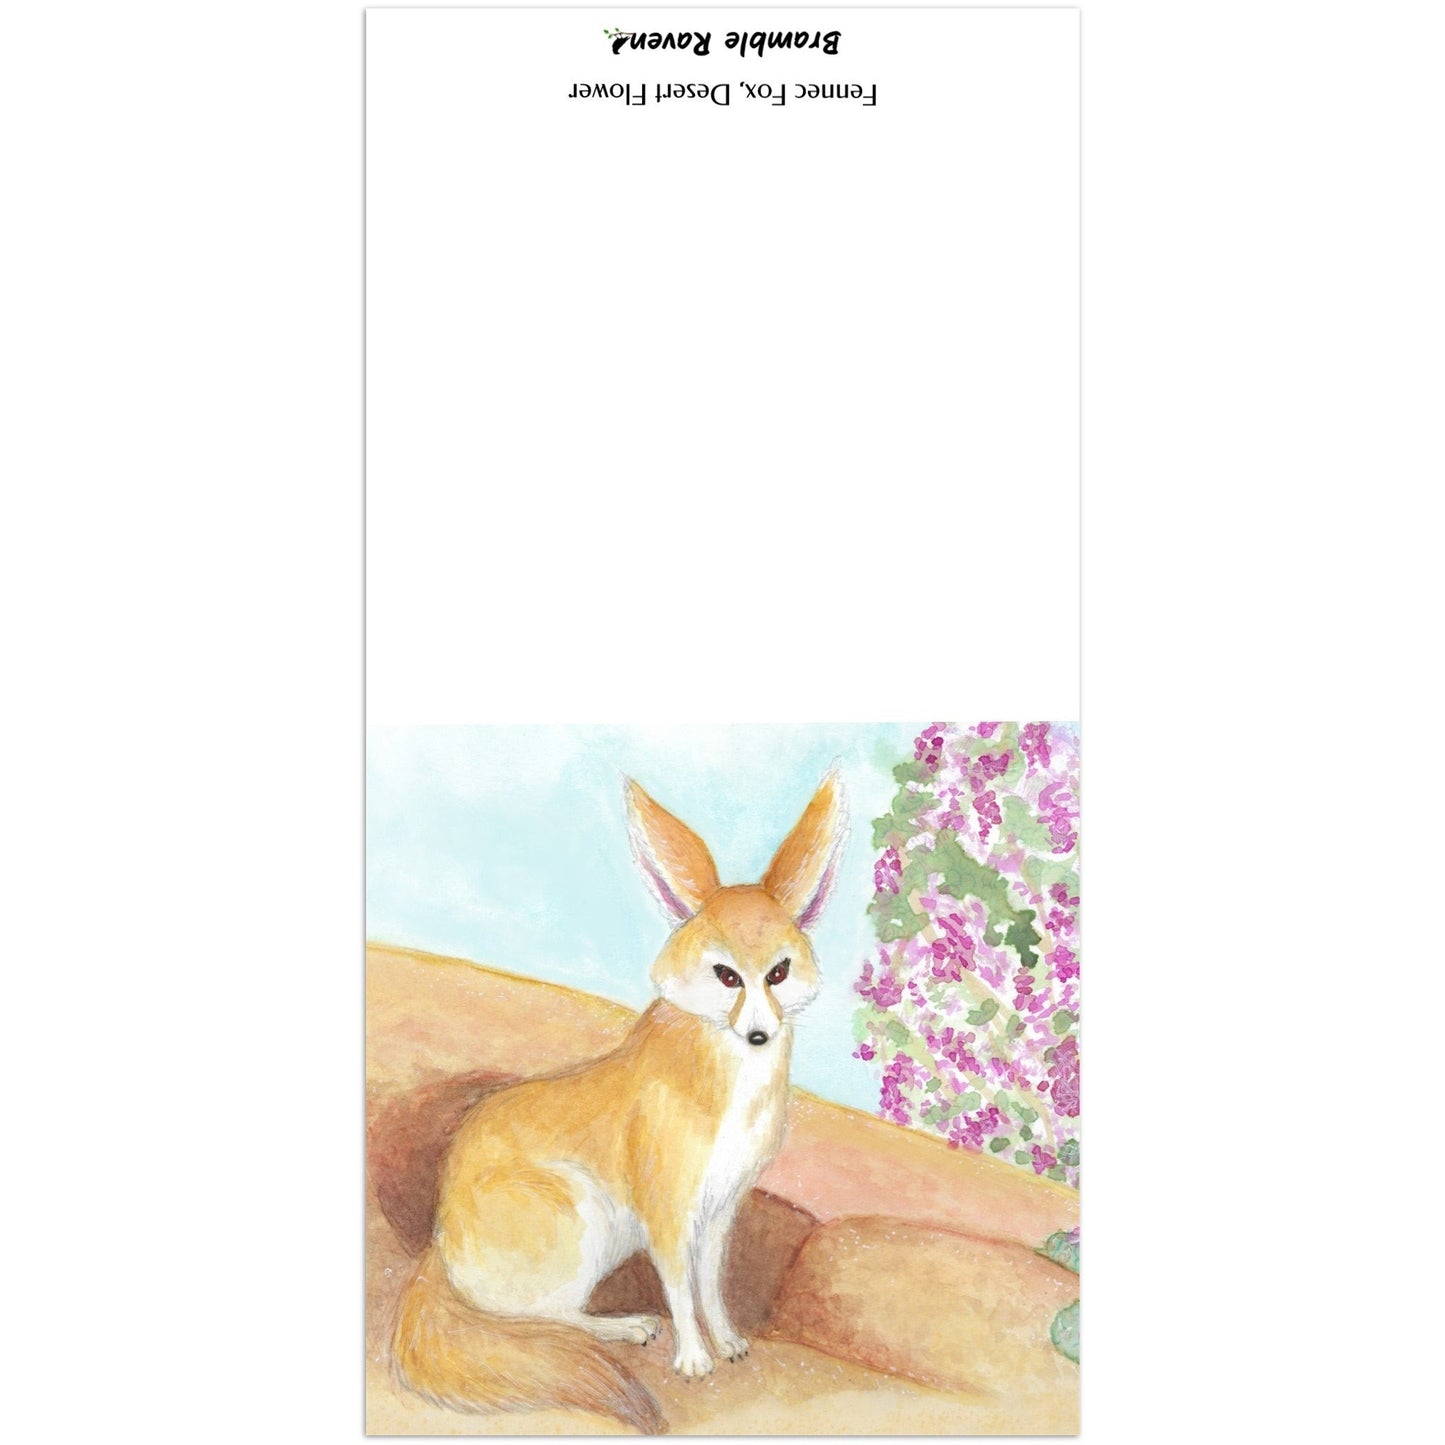 Pack of ten 5.25 x 5.25 inch greeting cards. Features watercolor print of fennec fox near it's den in the desert by a jacaranda tree on the front. Inside is blank. Made of coated paperboard. Comes with envelopes.